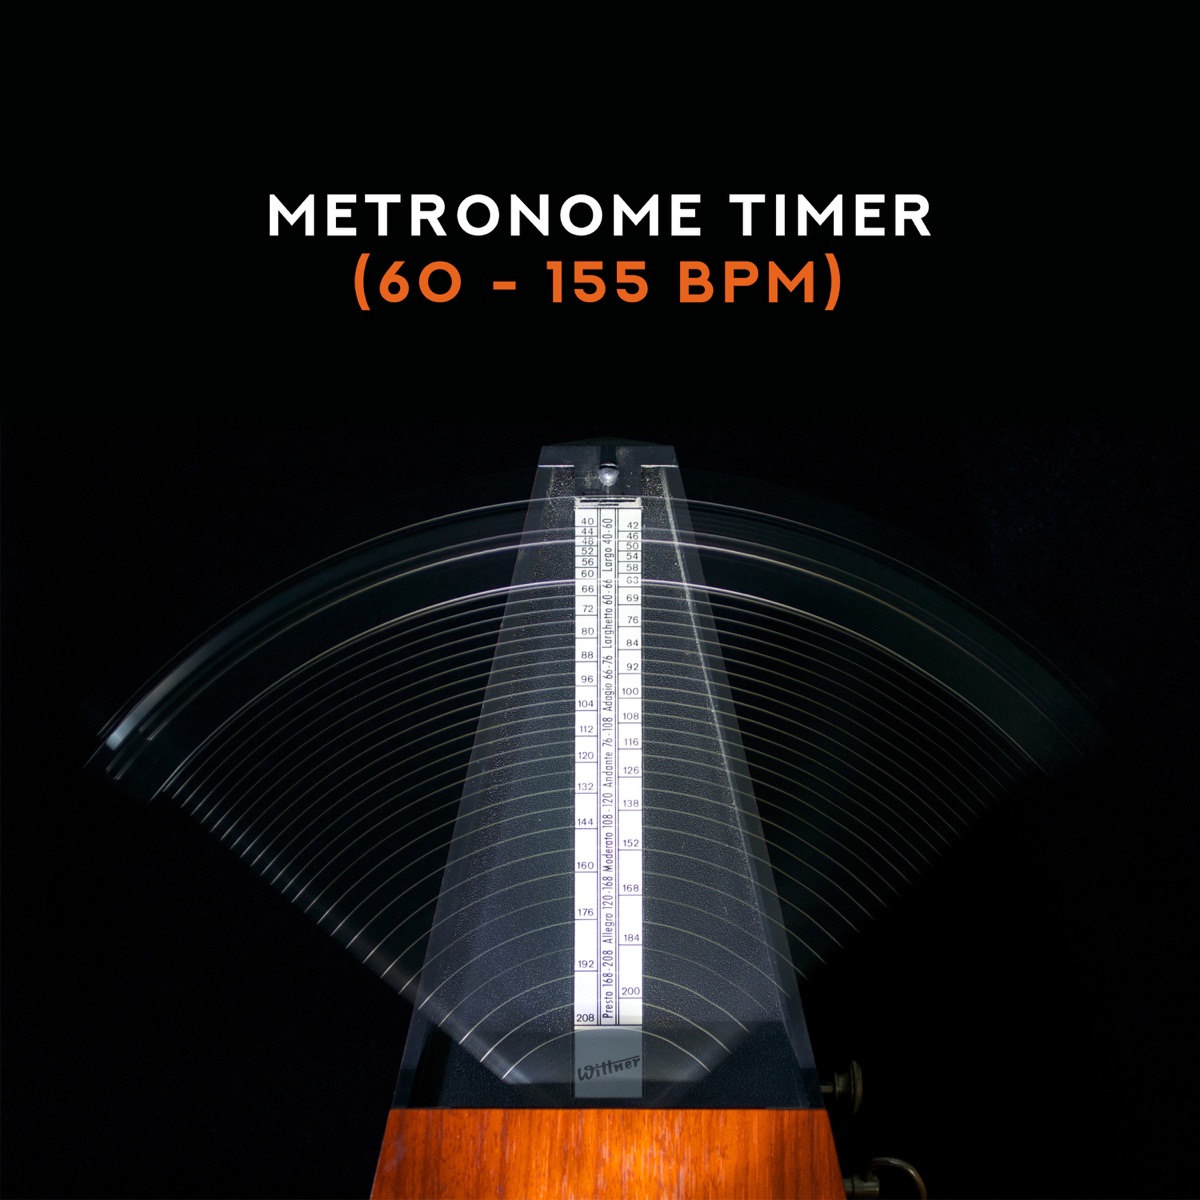 Metronome Timer (60 - 155 Bpm) Ideal to Study, School, Lessons, Classes -  Album by Sound Effects Zone & Meditation Music Zone - Apple Music